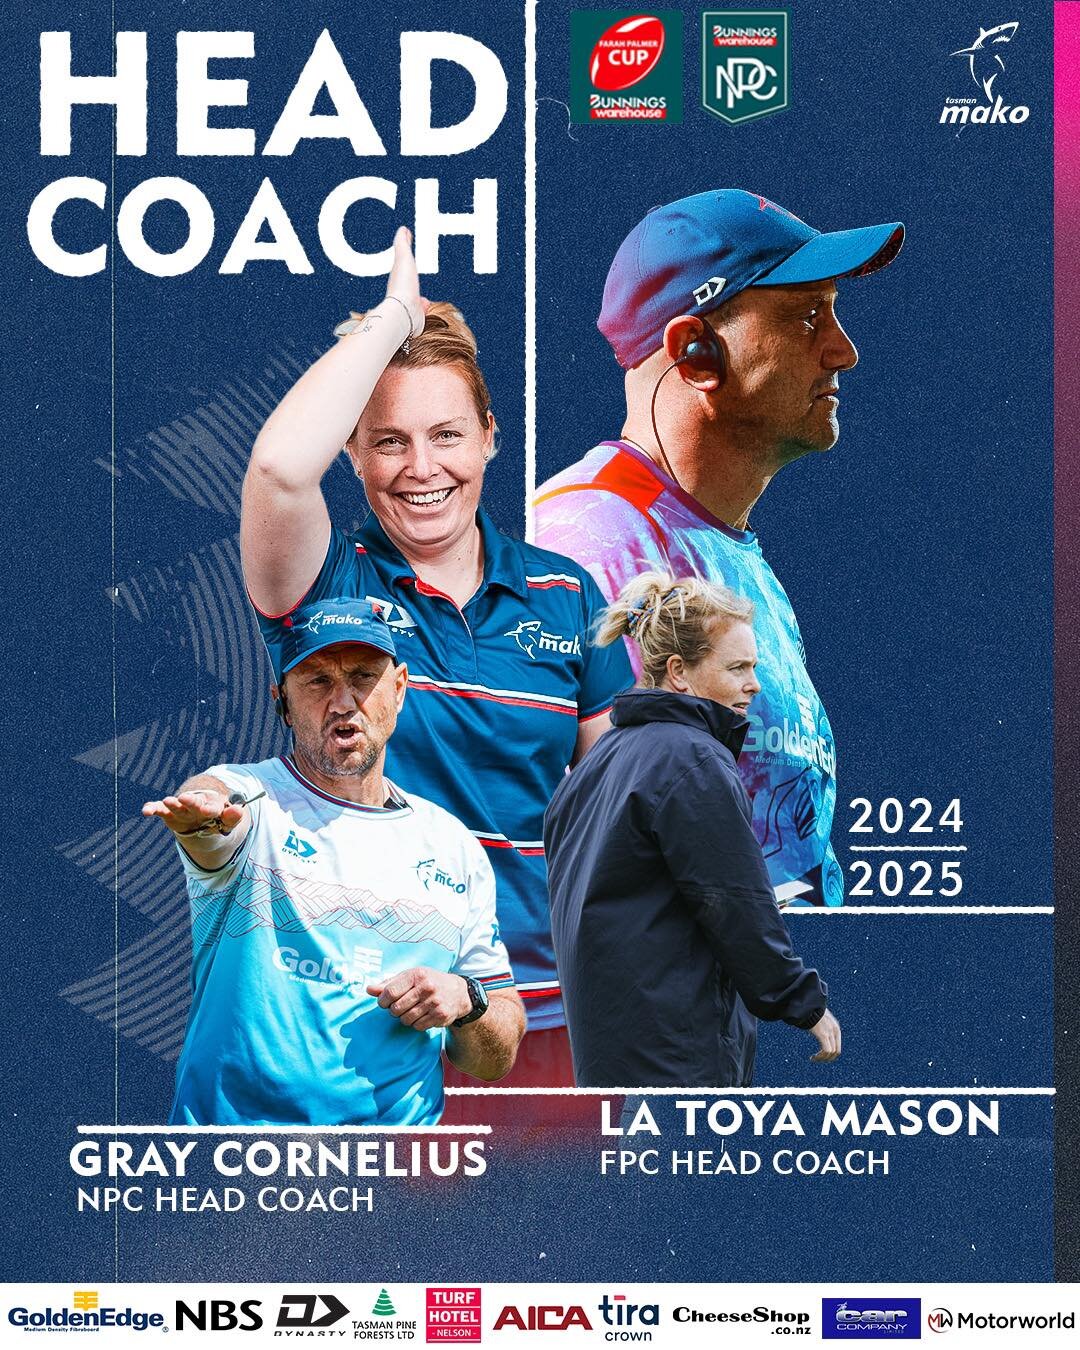 We are excited to announce La Toya Mason &amp; Gray Cornelius as our Mako head coaches in the National Provincial Championship and Farah Palmer Cup presented by Bunnings Warehouse. 

Follow the link in our bio to read more 🦈
#finzup